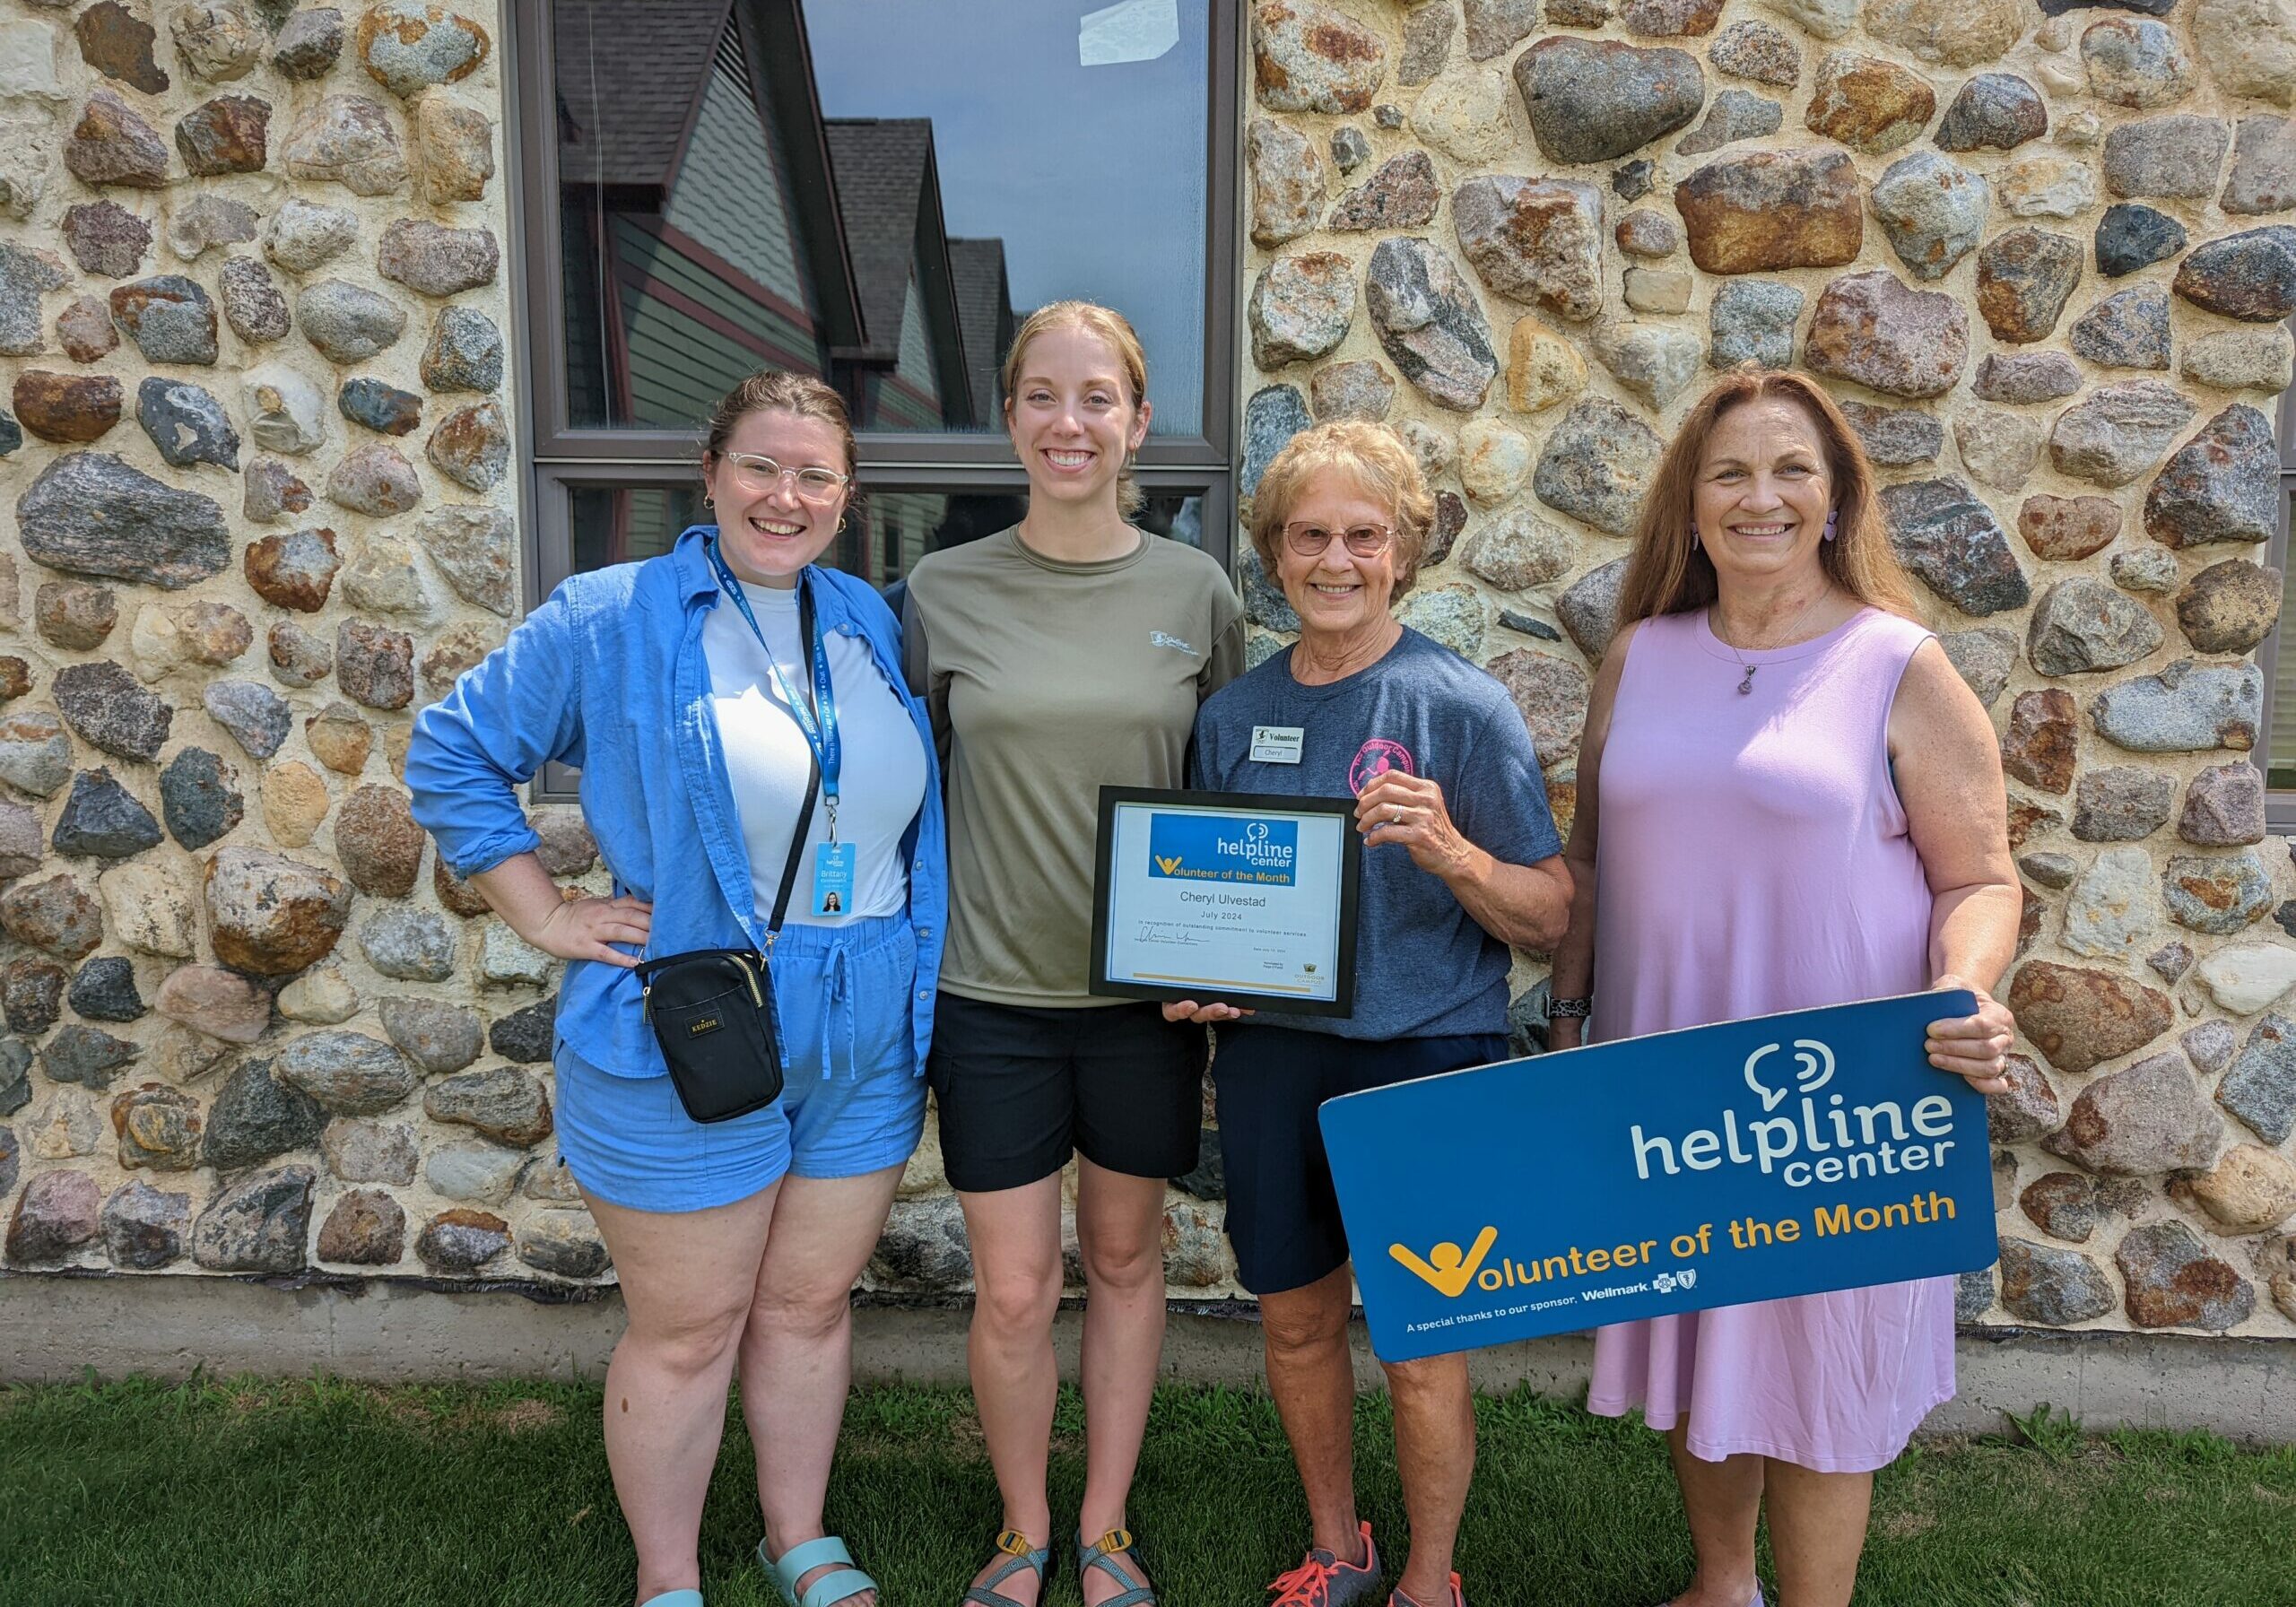 July Volunteer of the Month